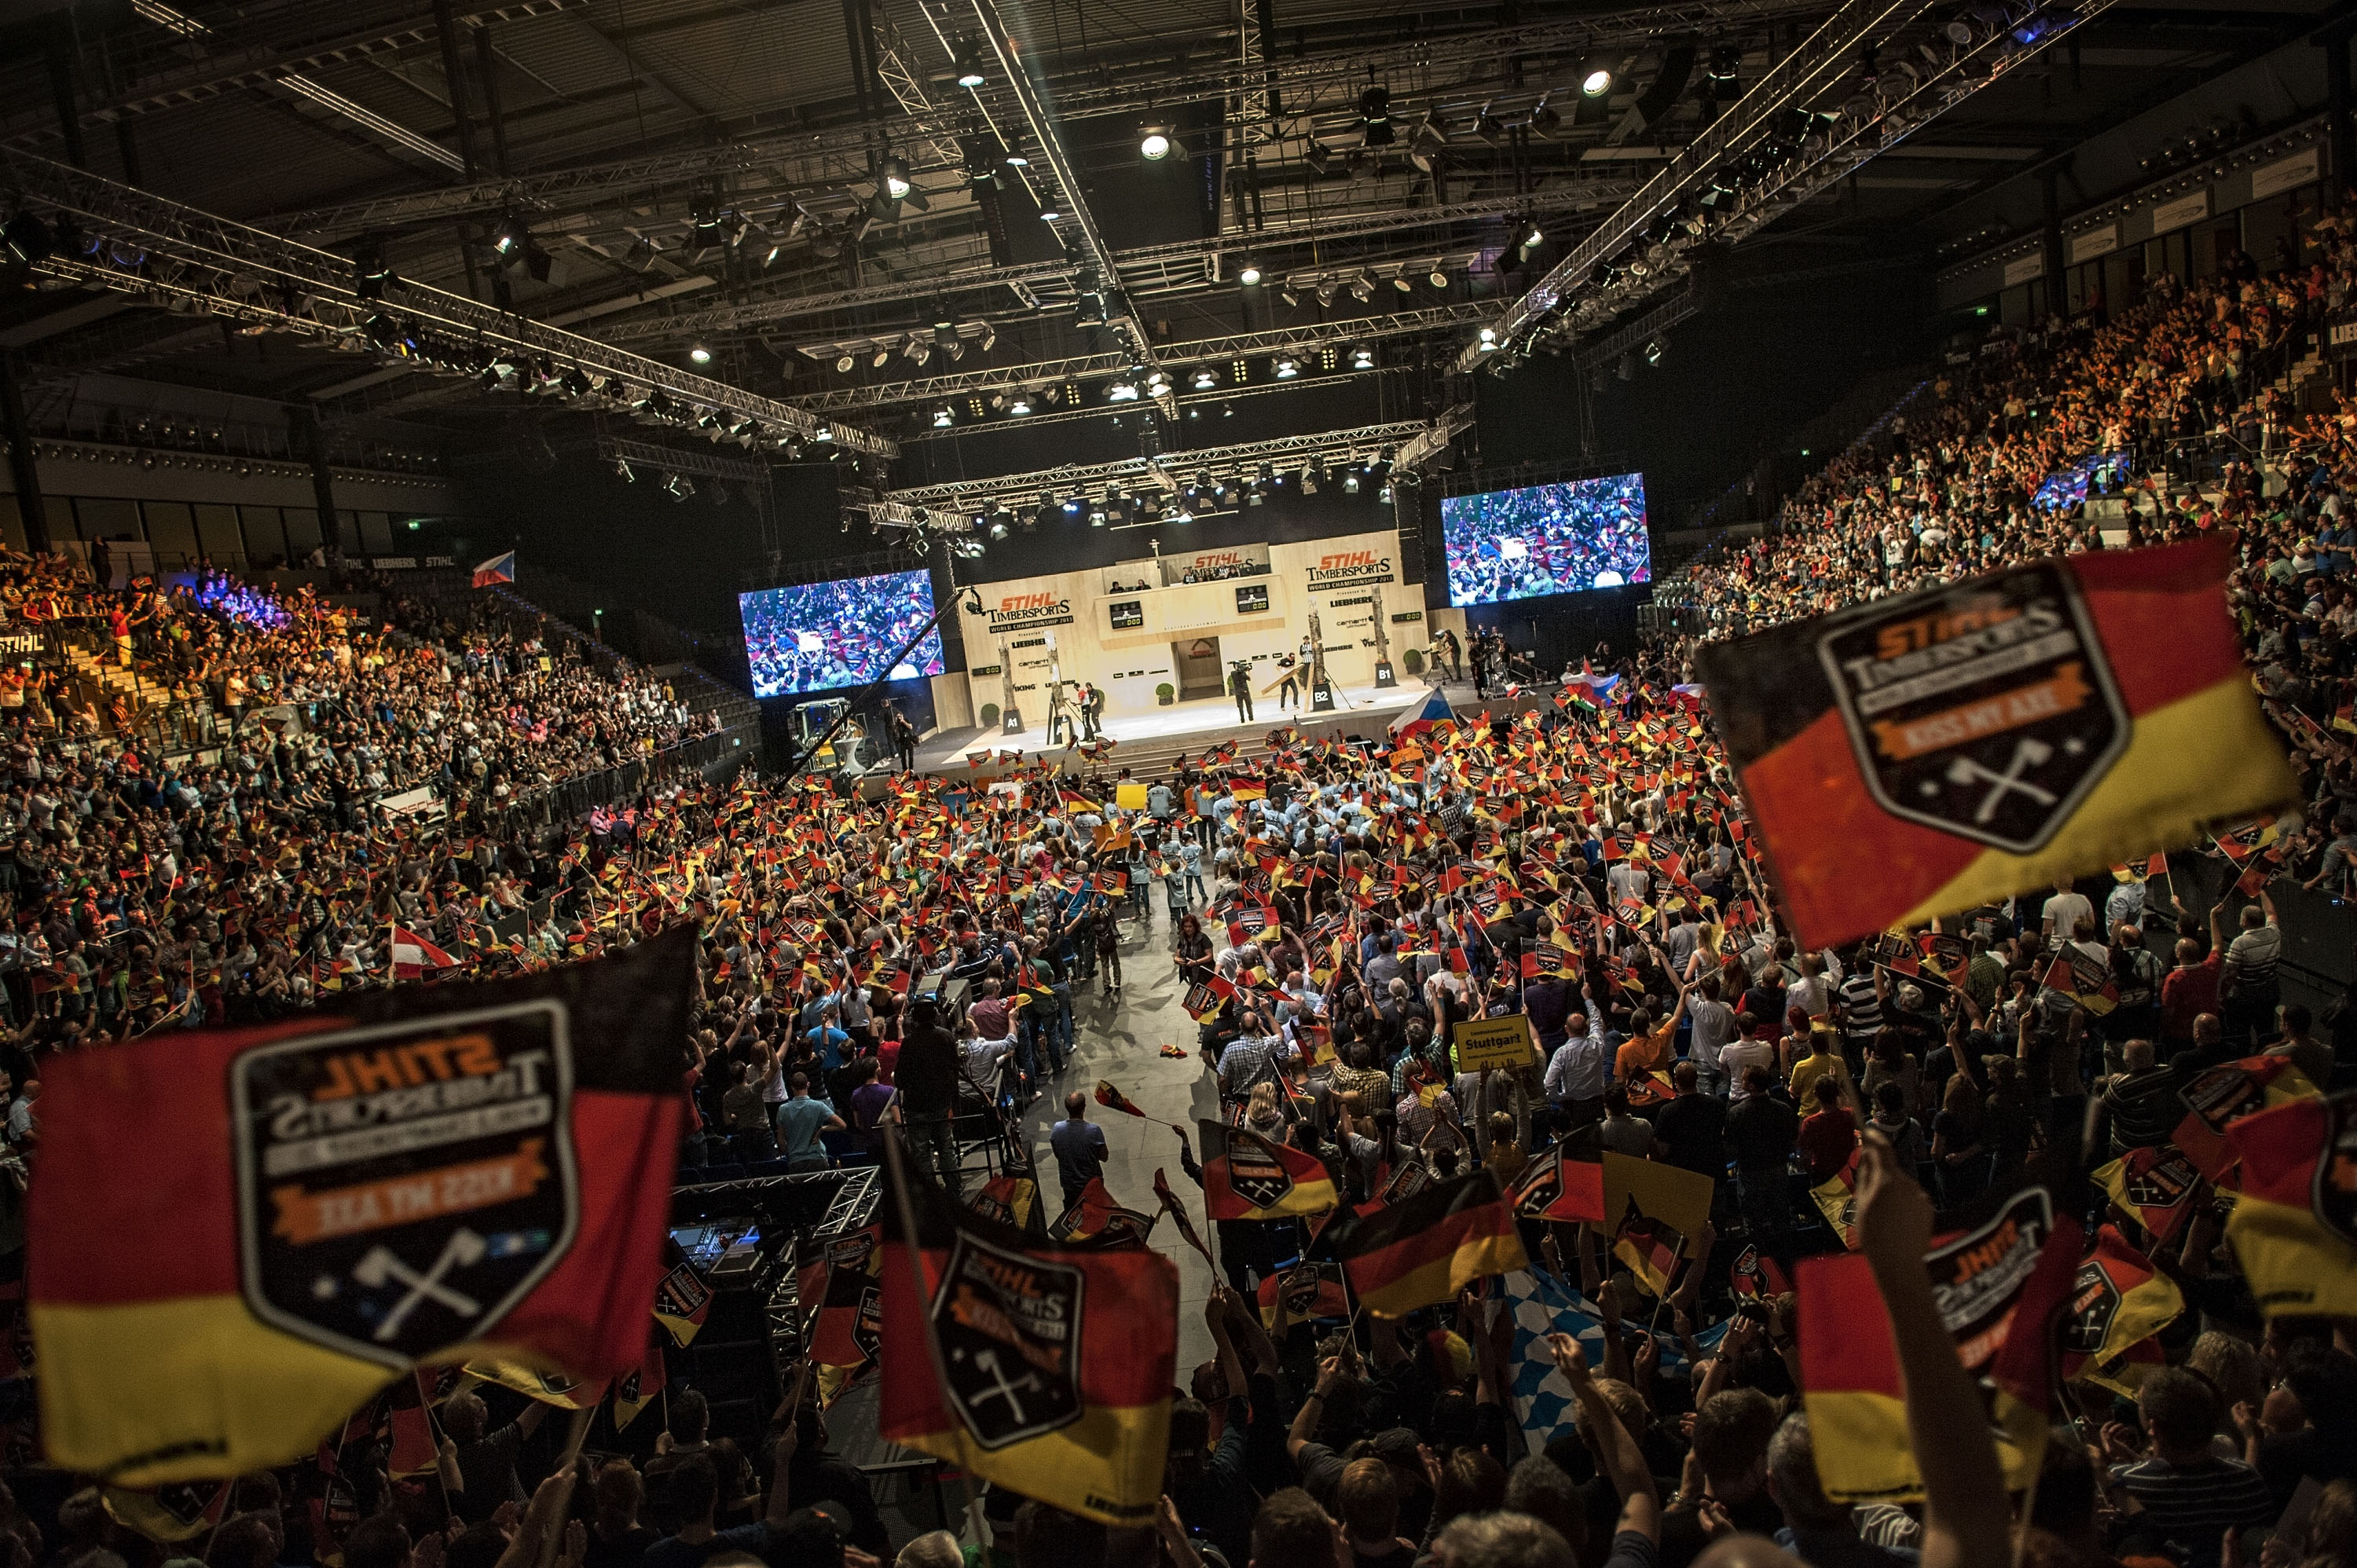 Electrifying atmosphere at the 2016 World Championship in Stuttgart's Porsche Arena.